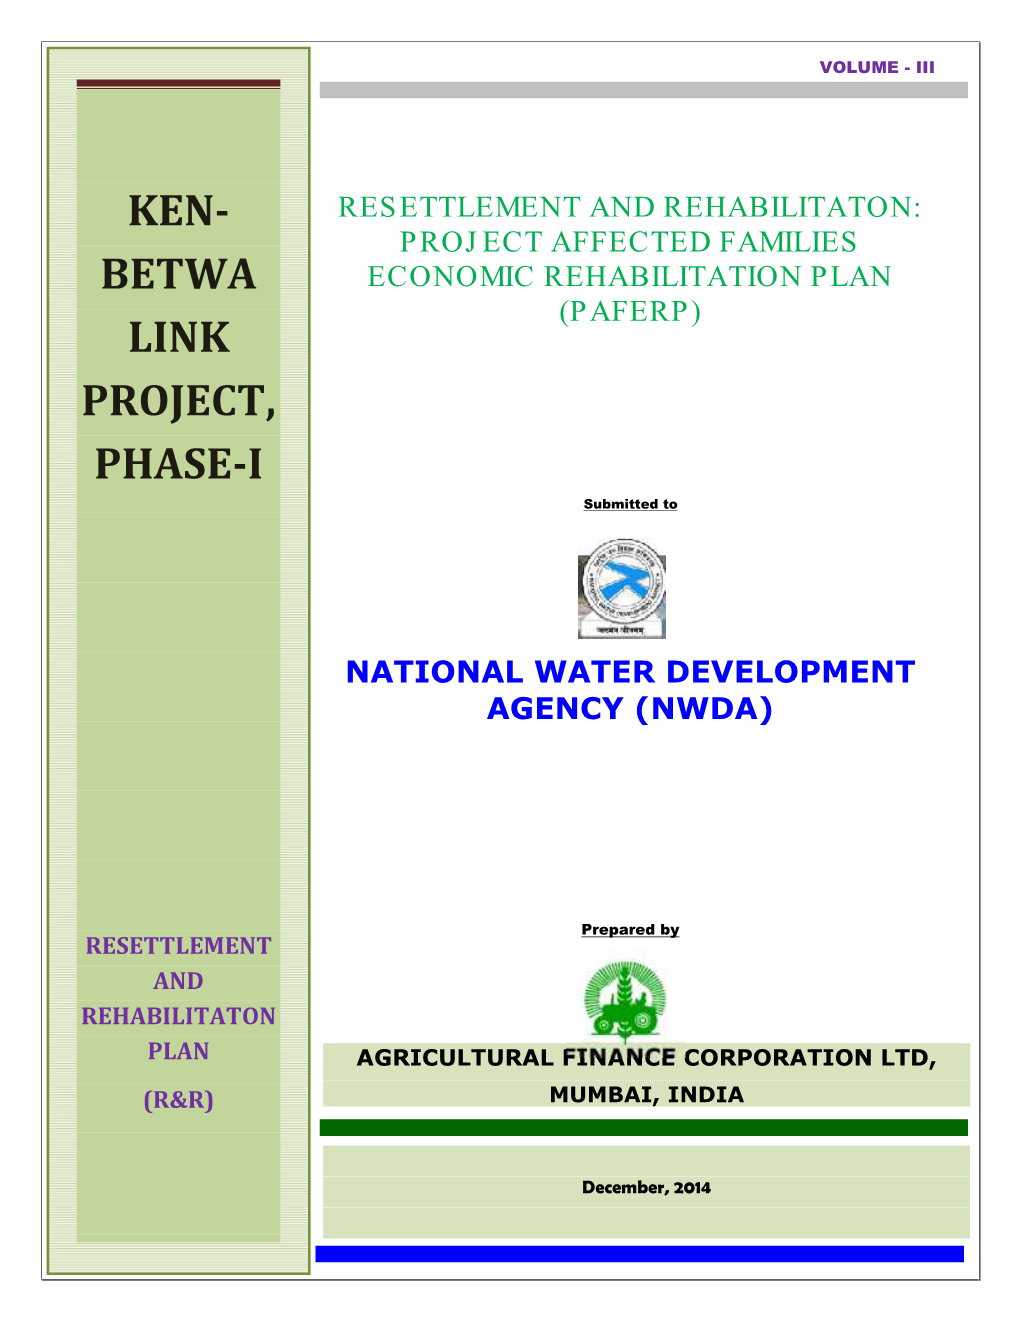 Ken- Betwa Link Project, Phase-I